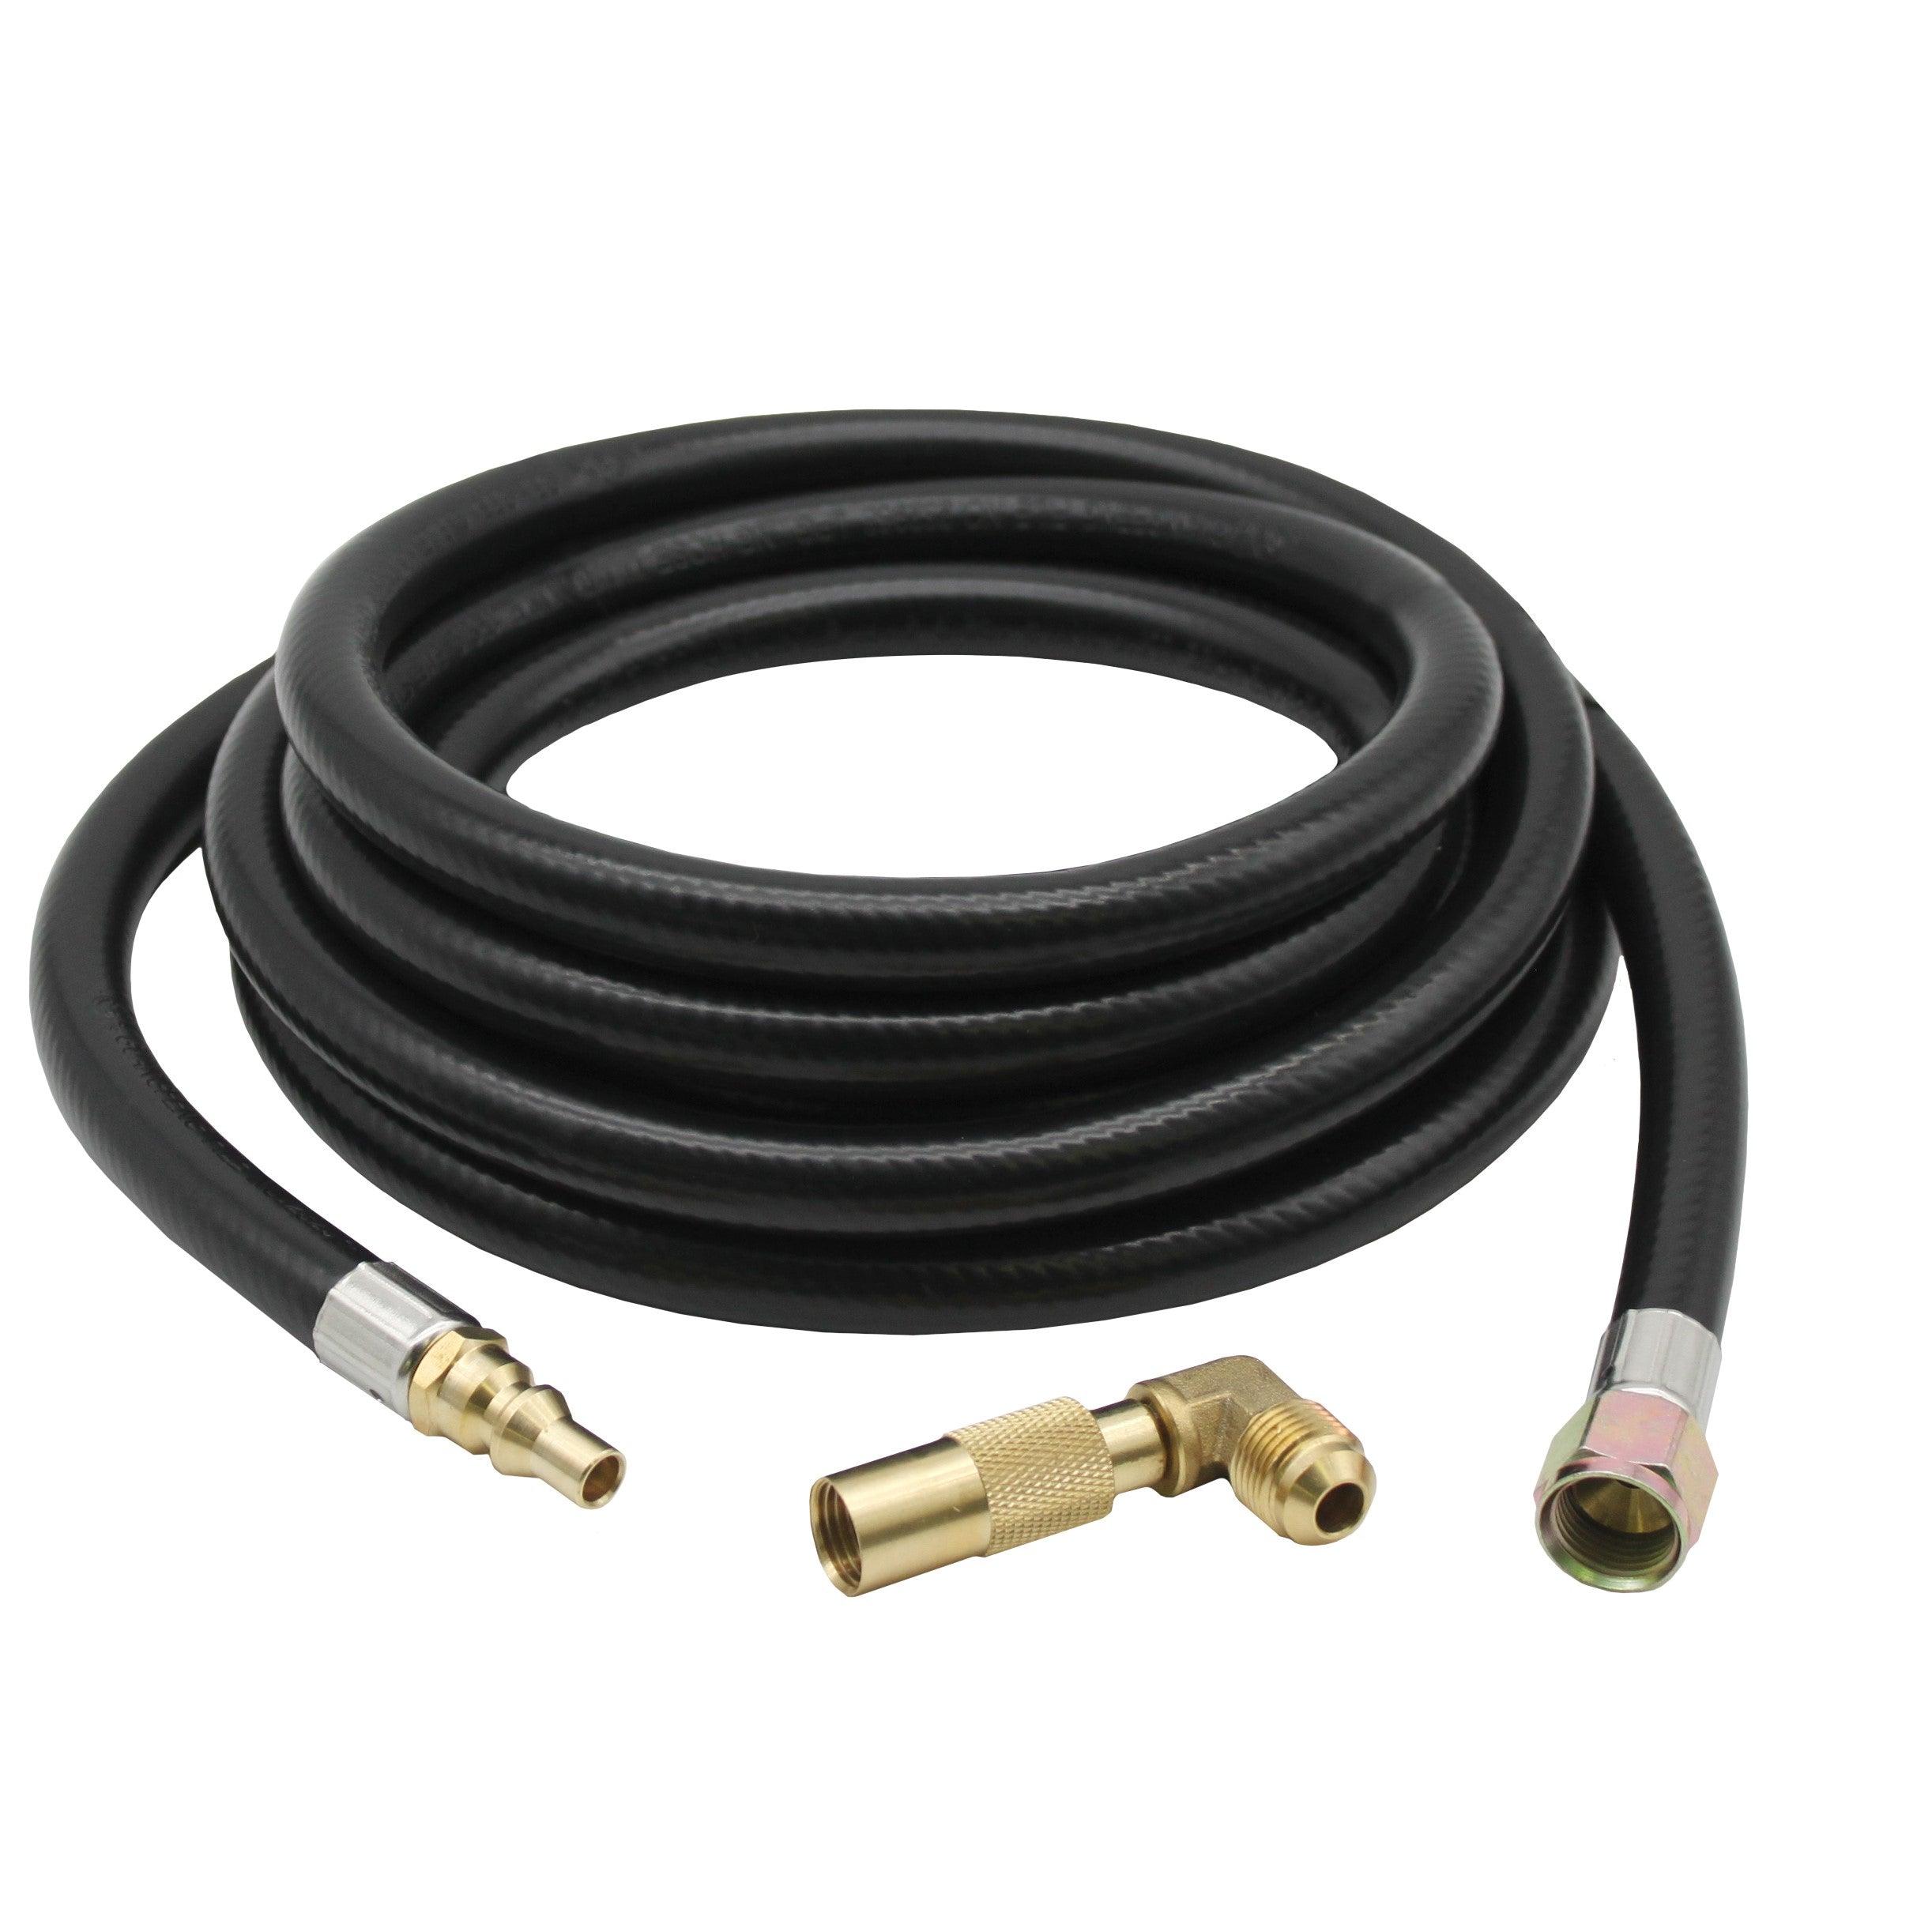 Flame King 12ft RV Quick Connect Hose Adapter for 17″ or 22'' Griddle - Flame King